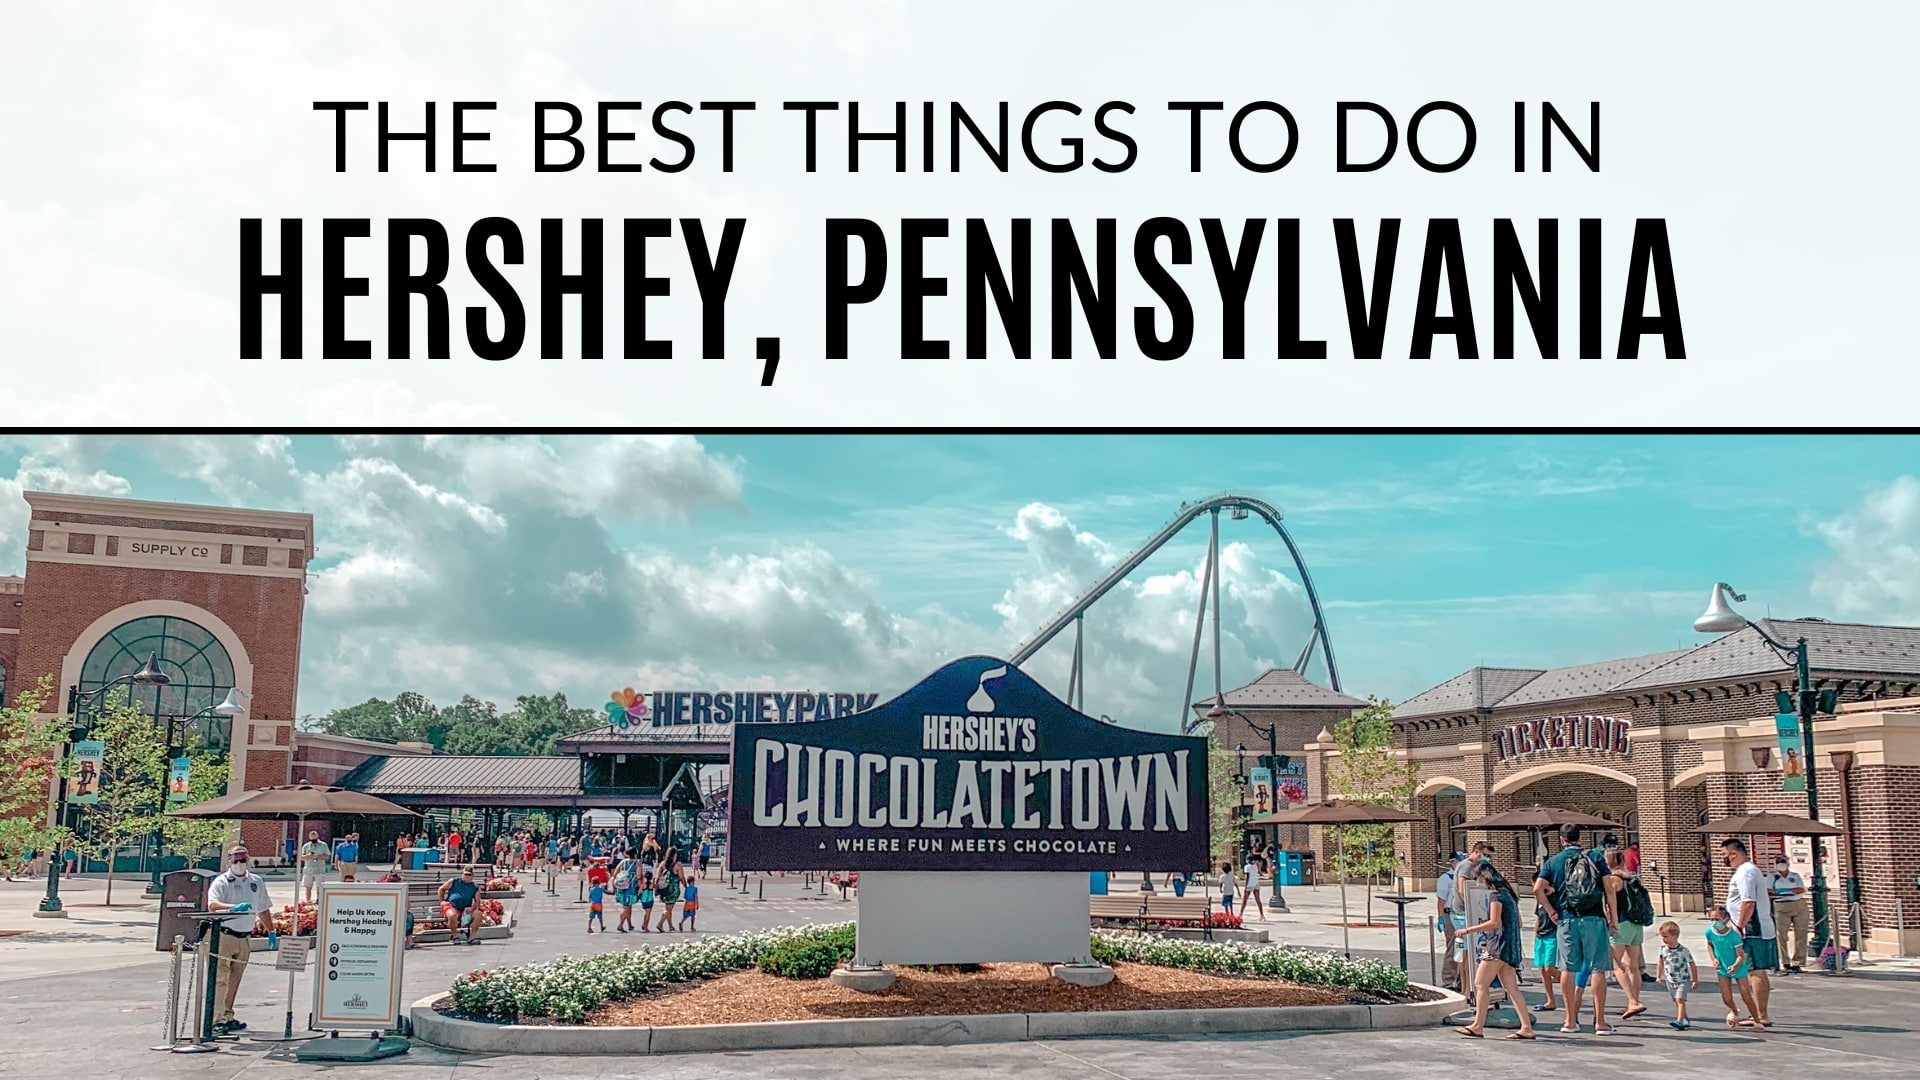 Entrance to Hershey Park with rollercoaster in background. Text on the image says "The best things to do in Hershey, Pennsylvania".